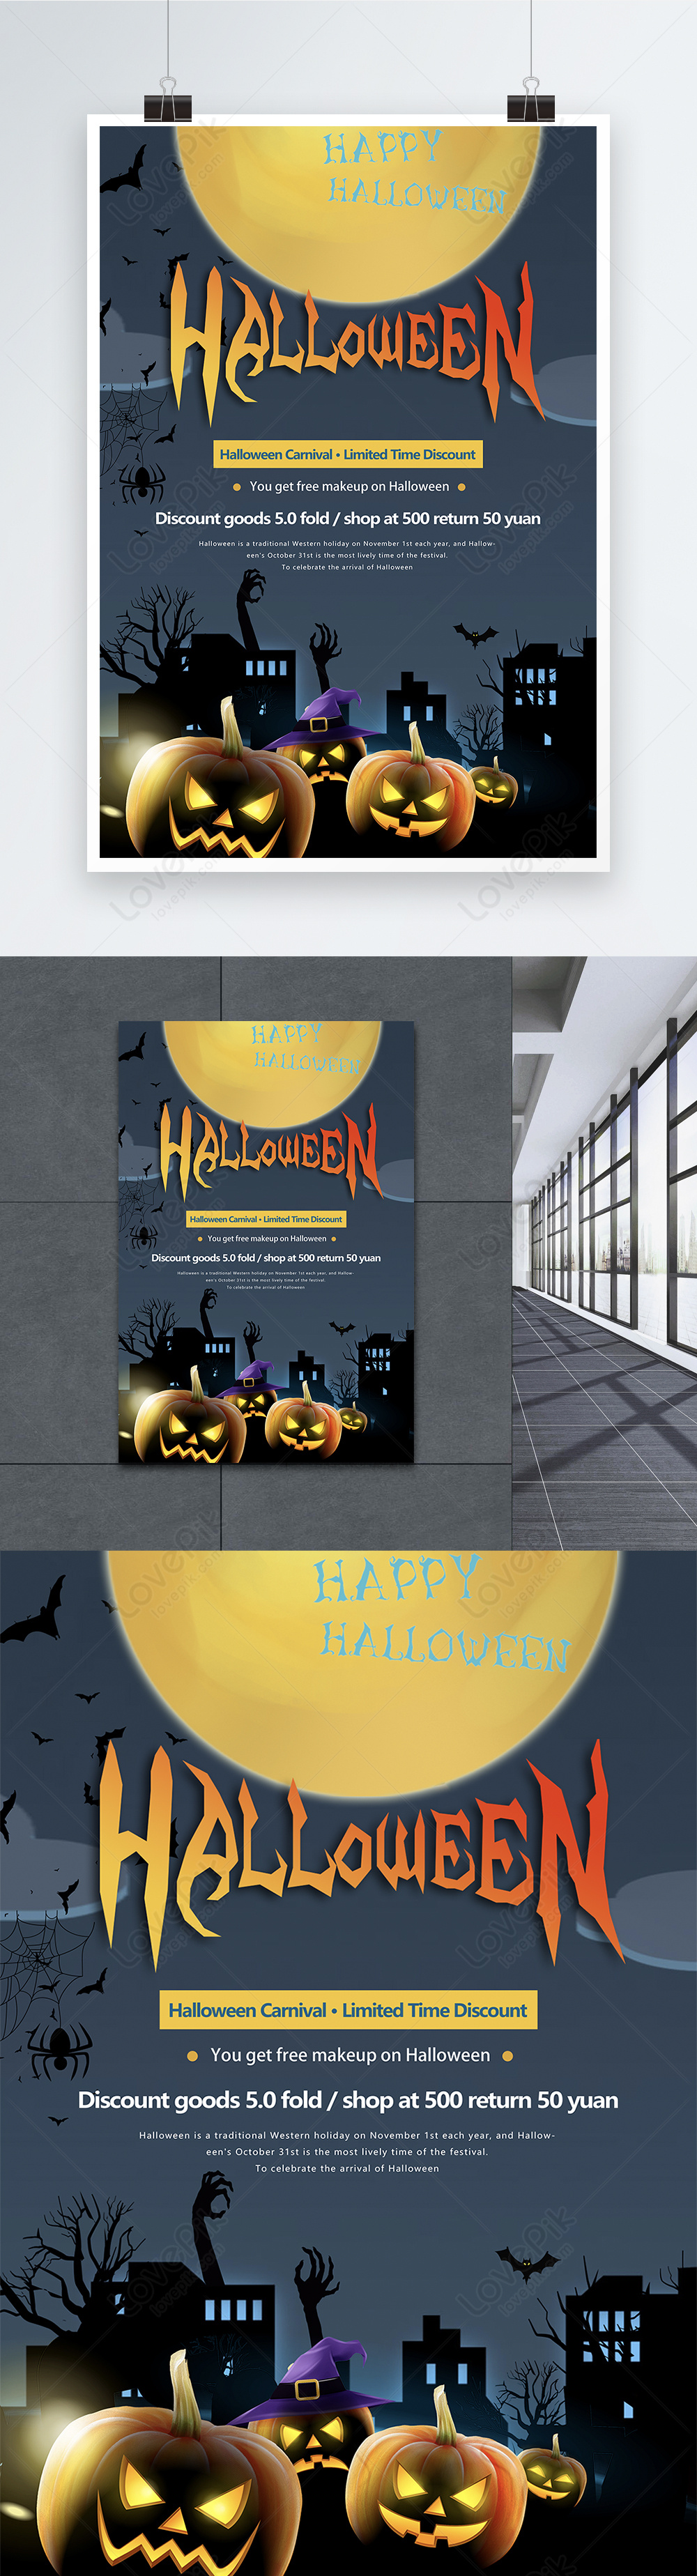 Download Yellow Pumpkin Halloween Background Images Hd Psd Poster Backgrounds 605713098 Lovepik Com Yellowimages Mockups